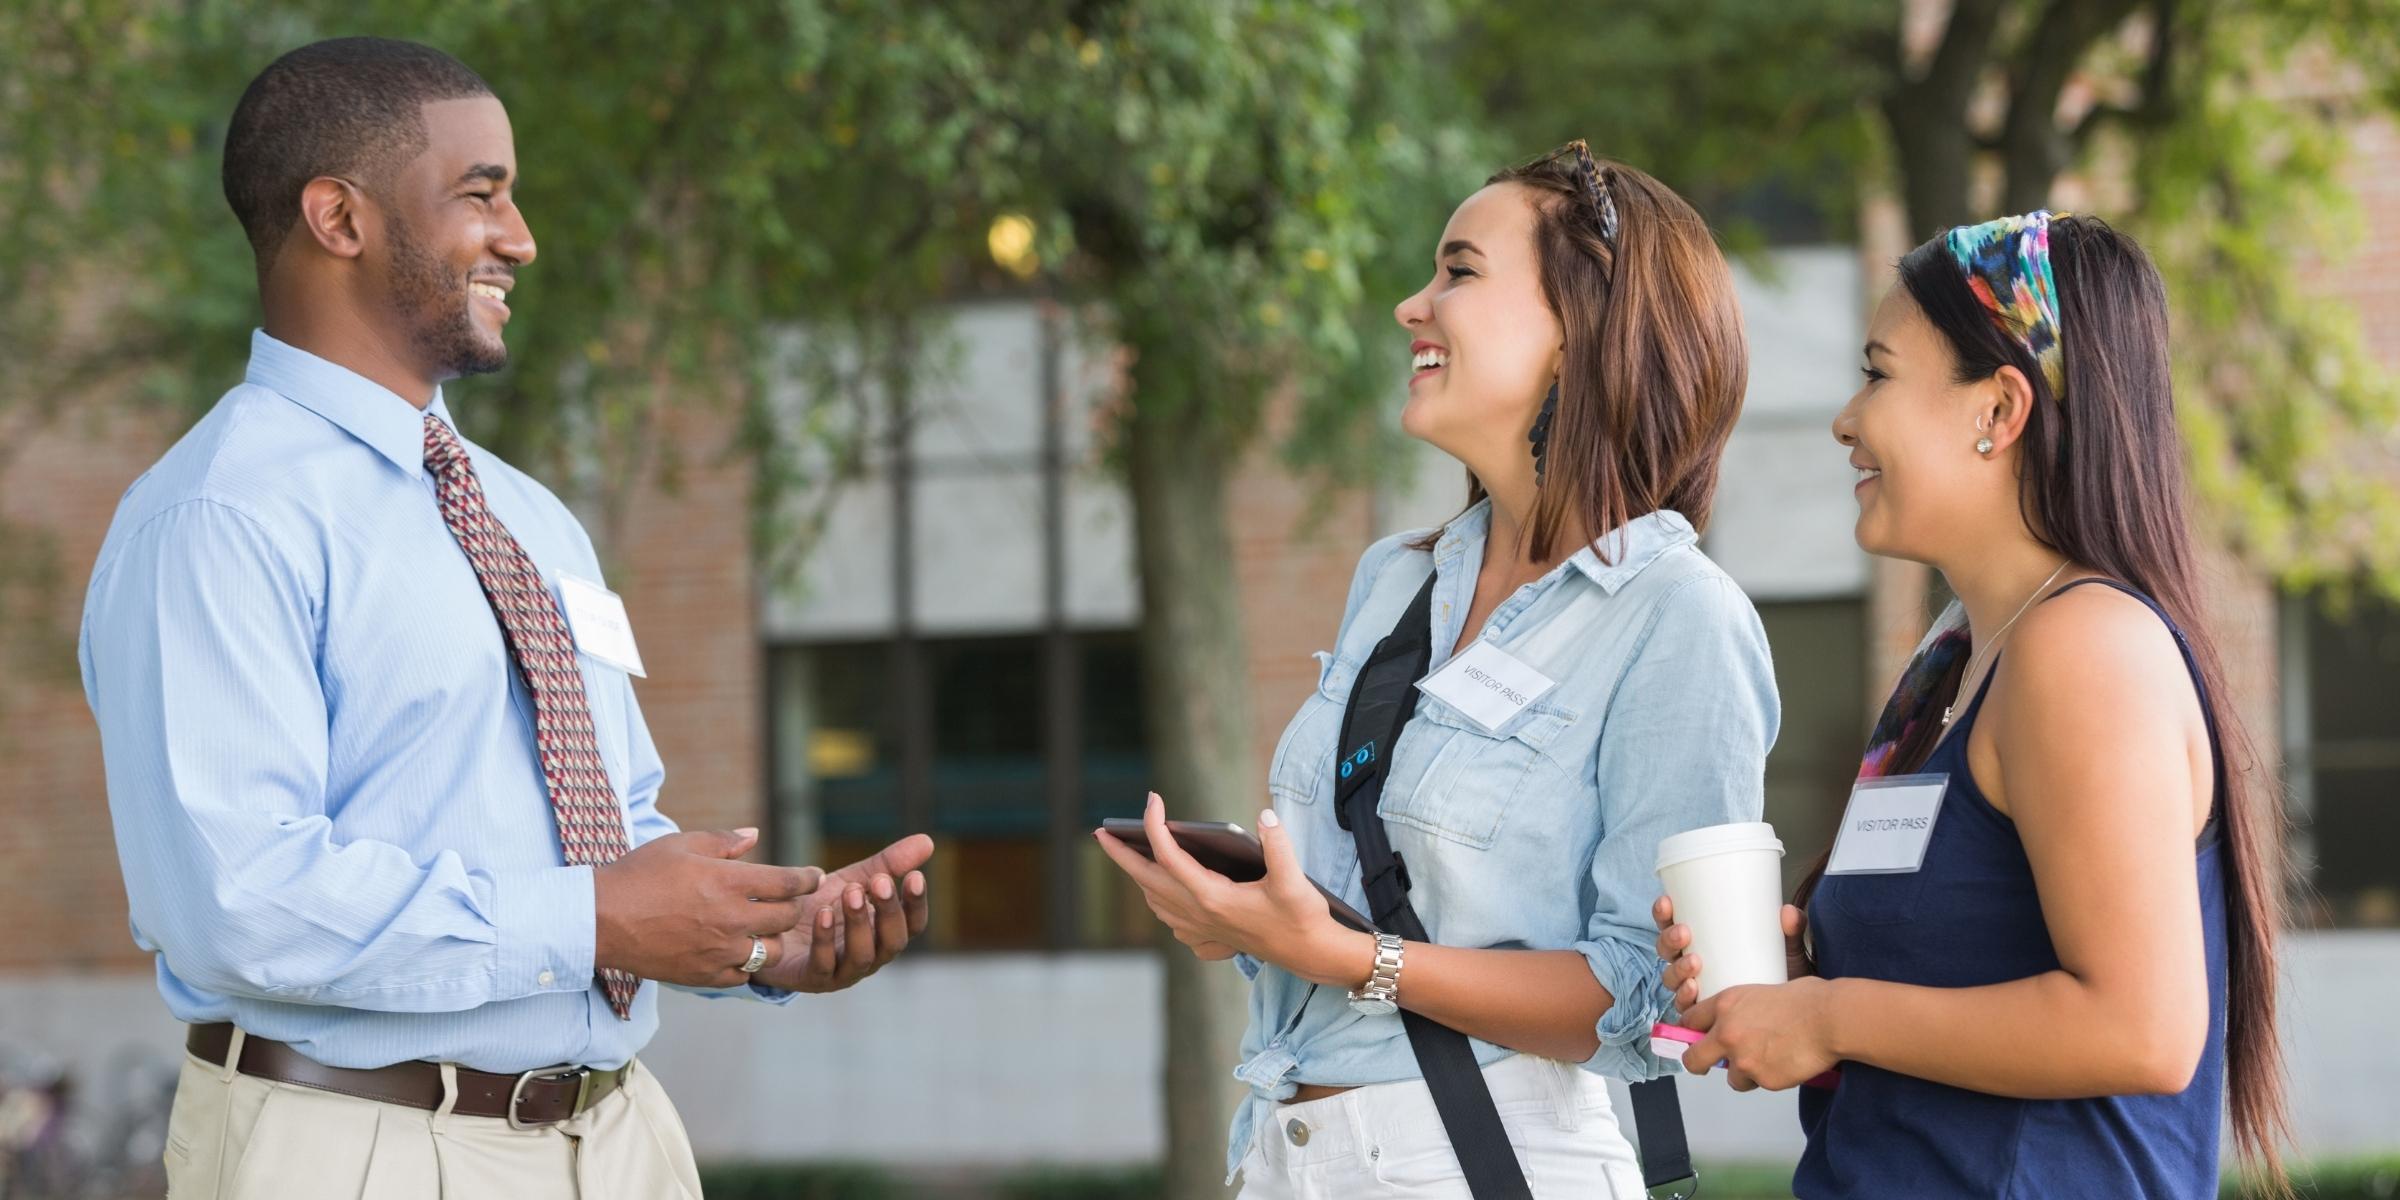 three people smiling and wearing nametags as they talk to each other on a college campus